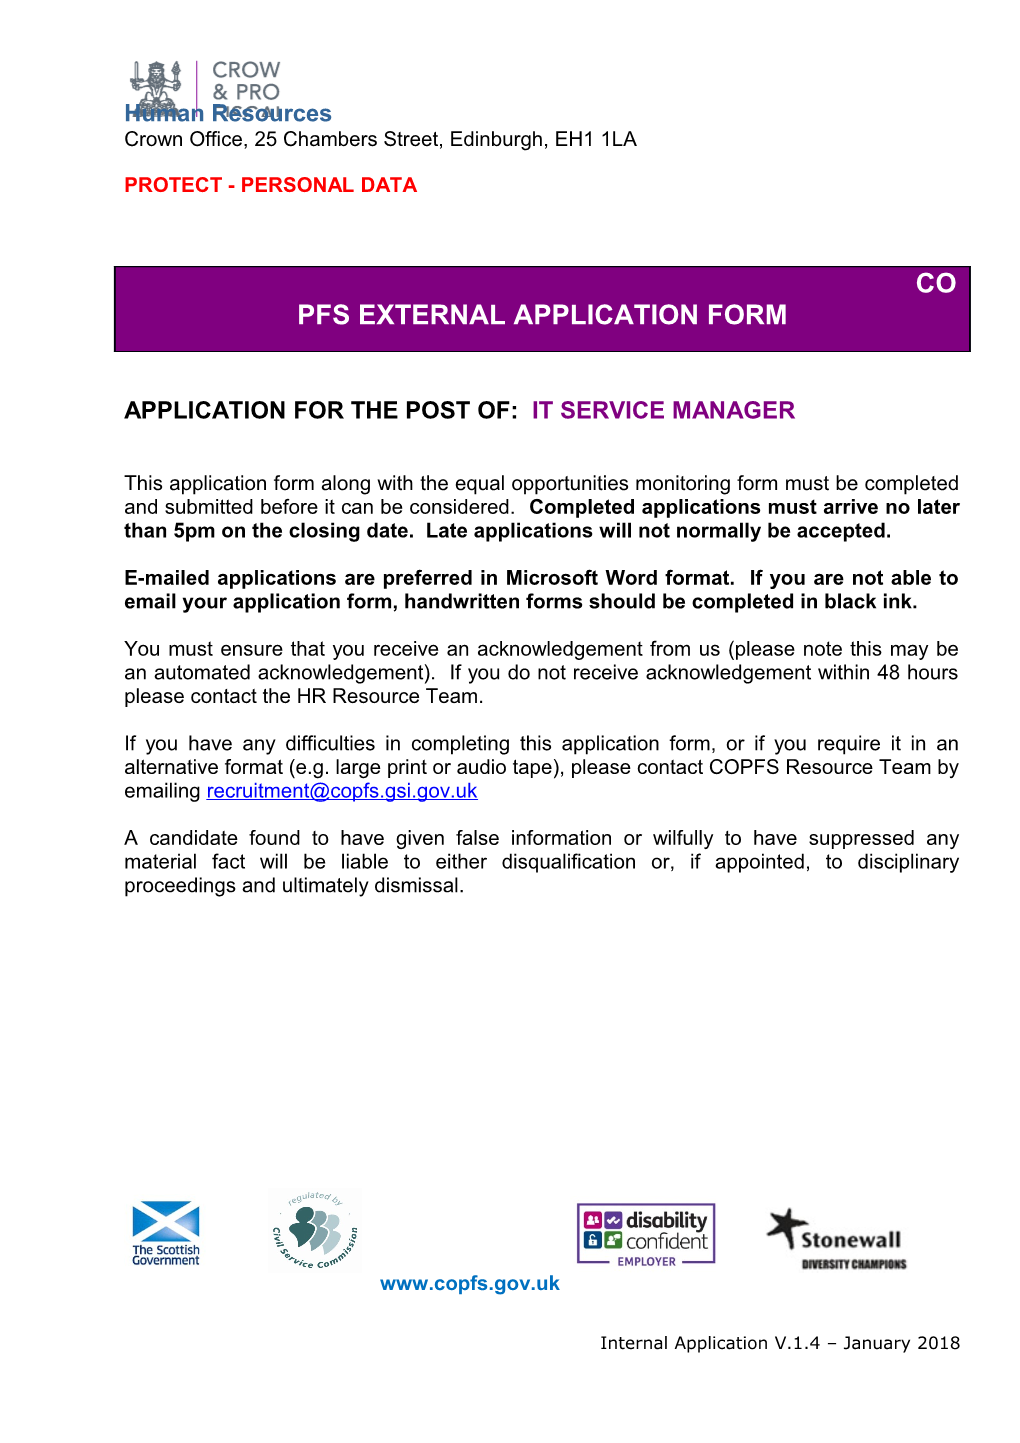 Application for the Post Of:It Service Manager